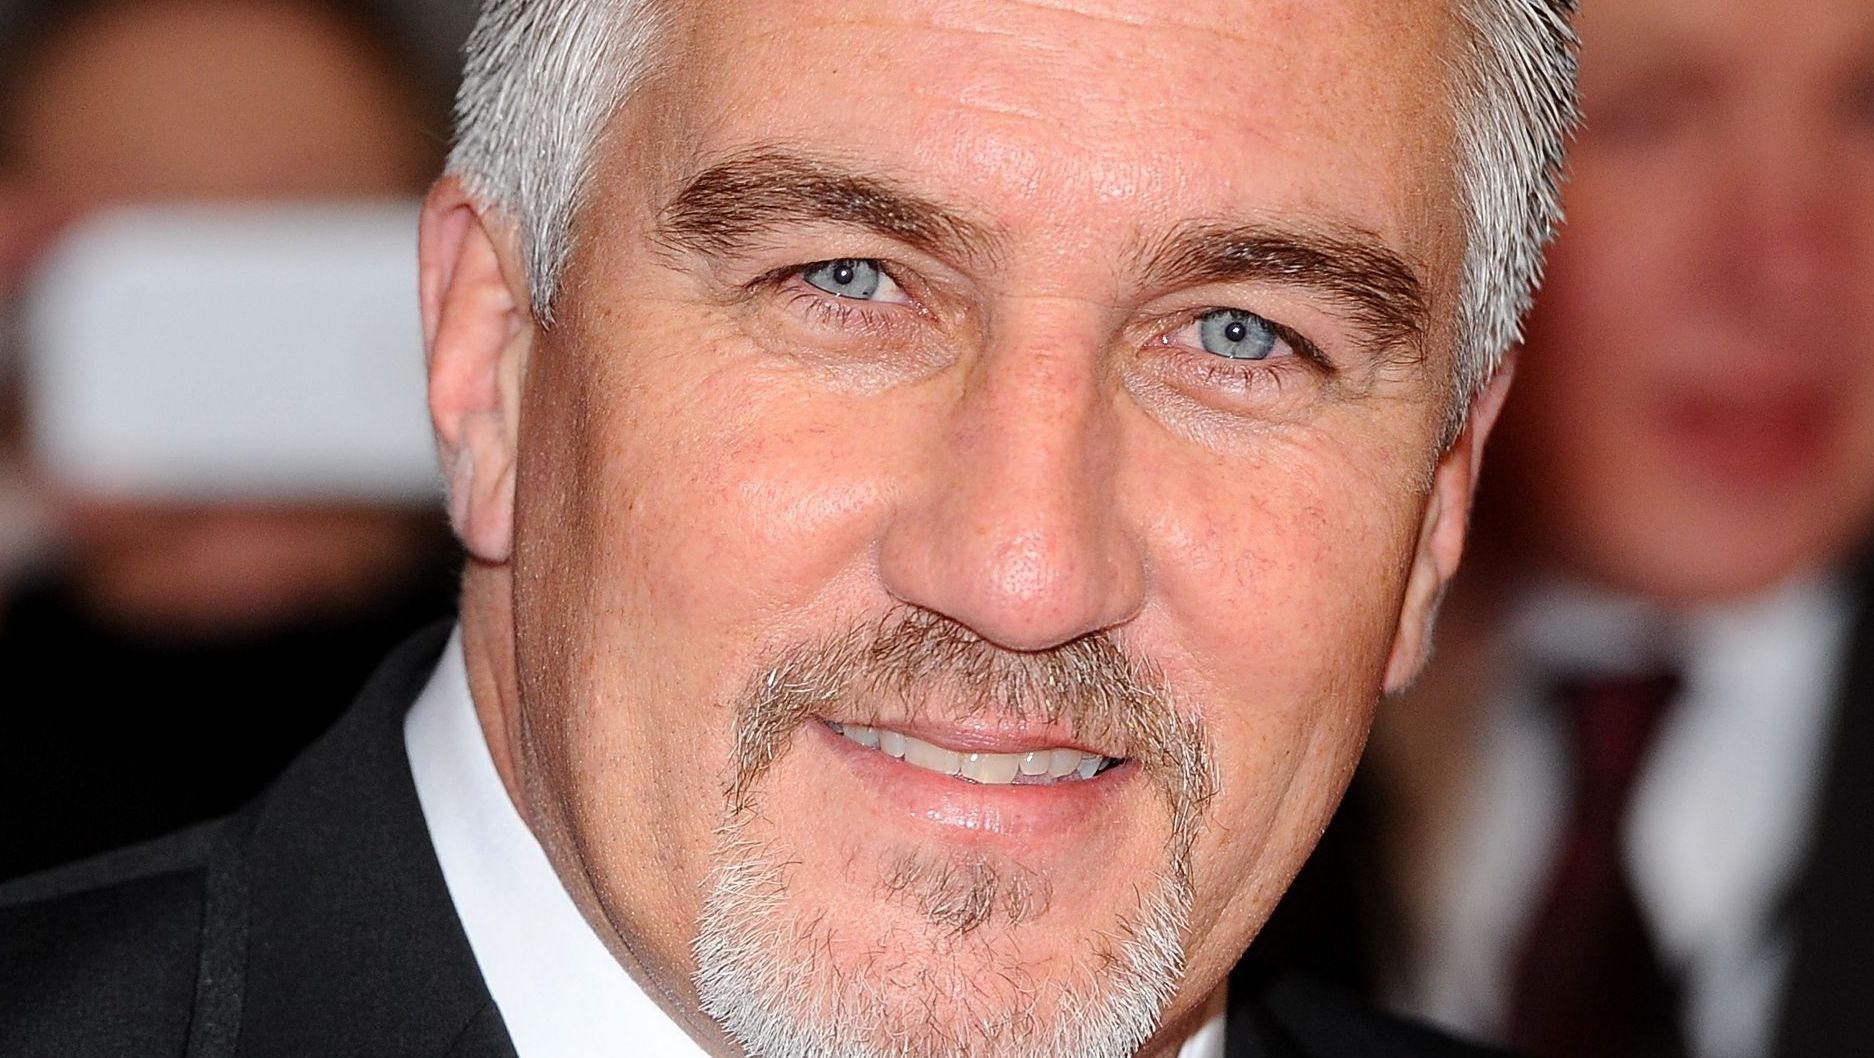 Paul Hollywood smiles with blue eyes.